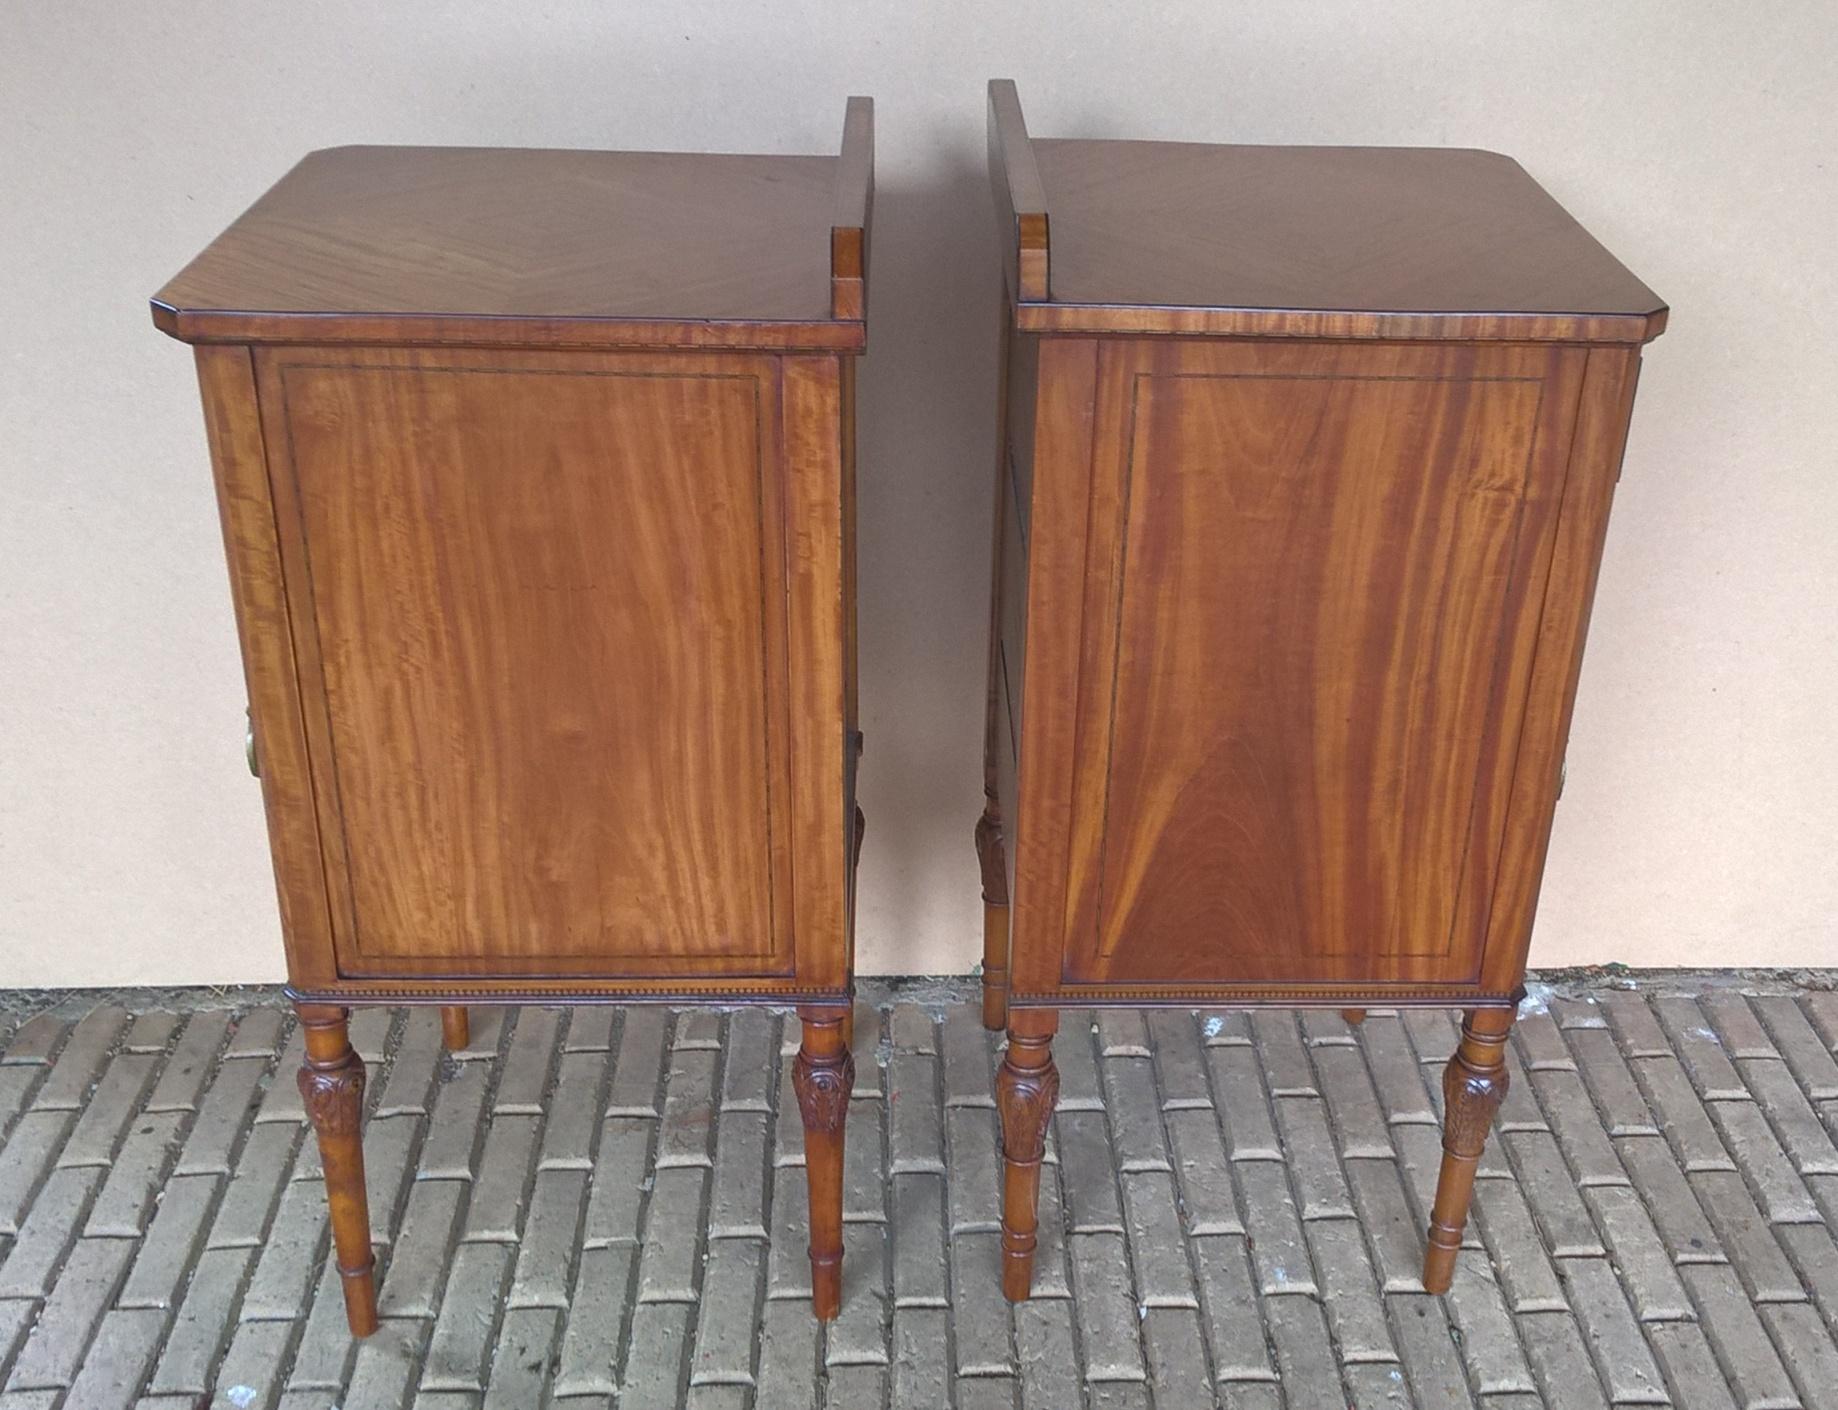 Near Matched Pair of Edwardian Satinwood Bedside Cabinets In Good Condition For Sale In Hemel Hempstead, Hertfordshire